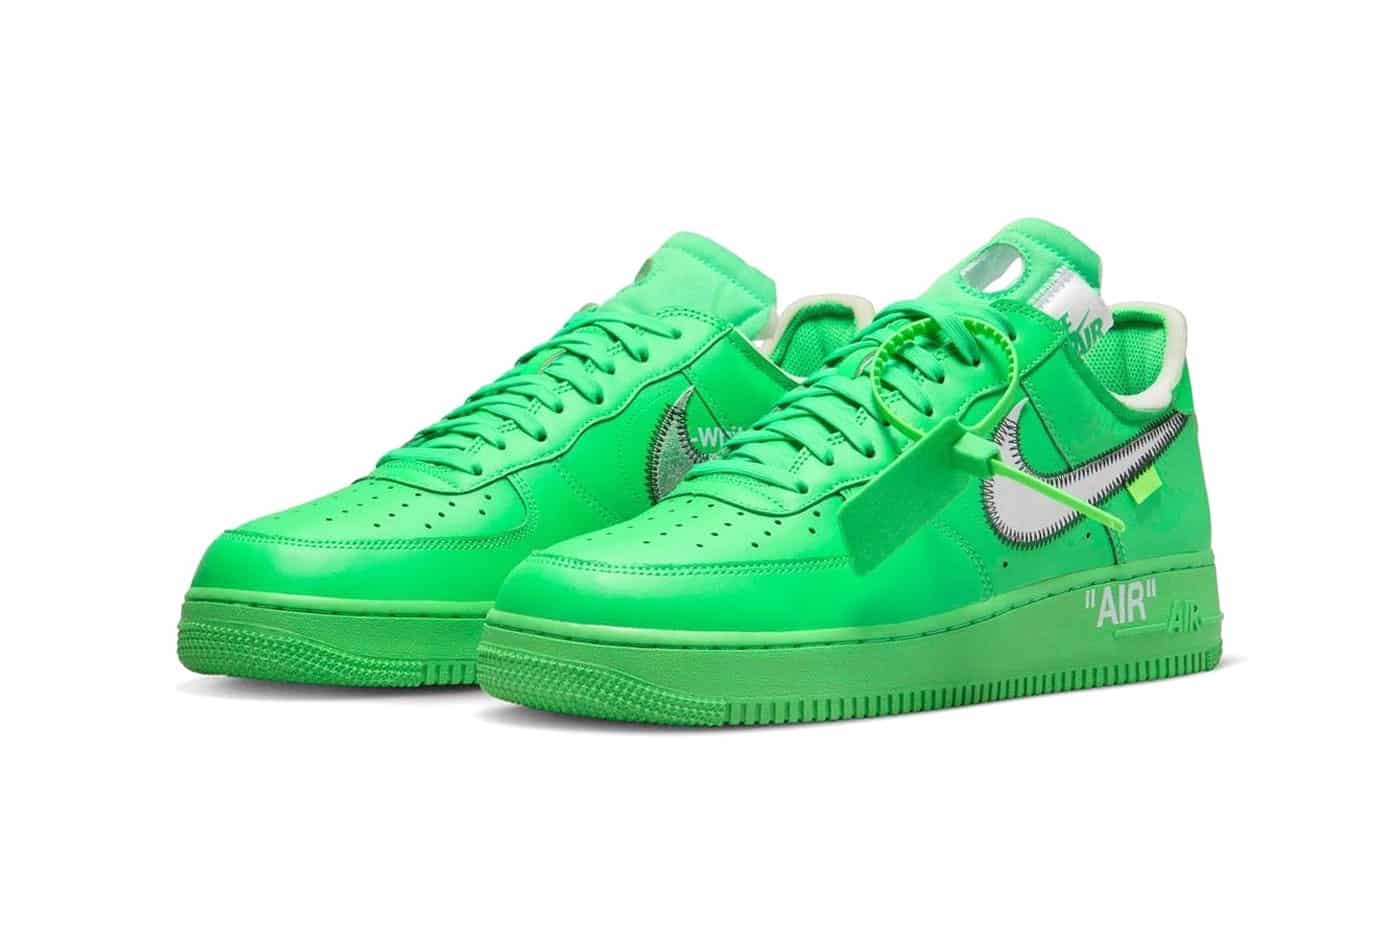 Off-White x Nike Air Force 1 Low "Light Green Spark"